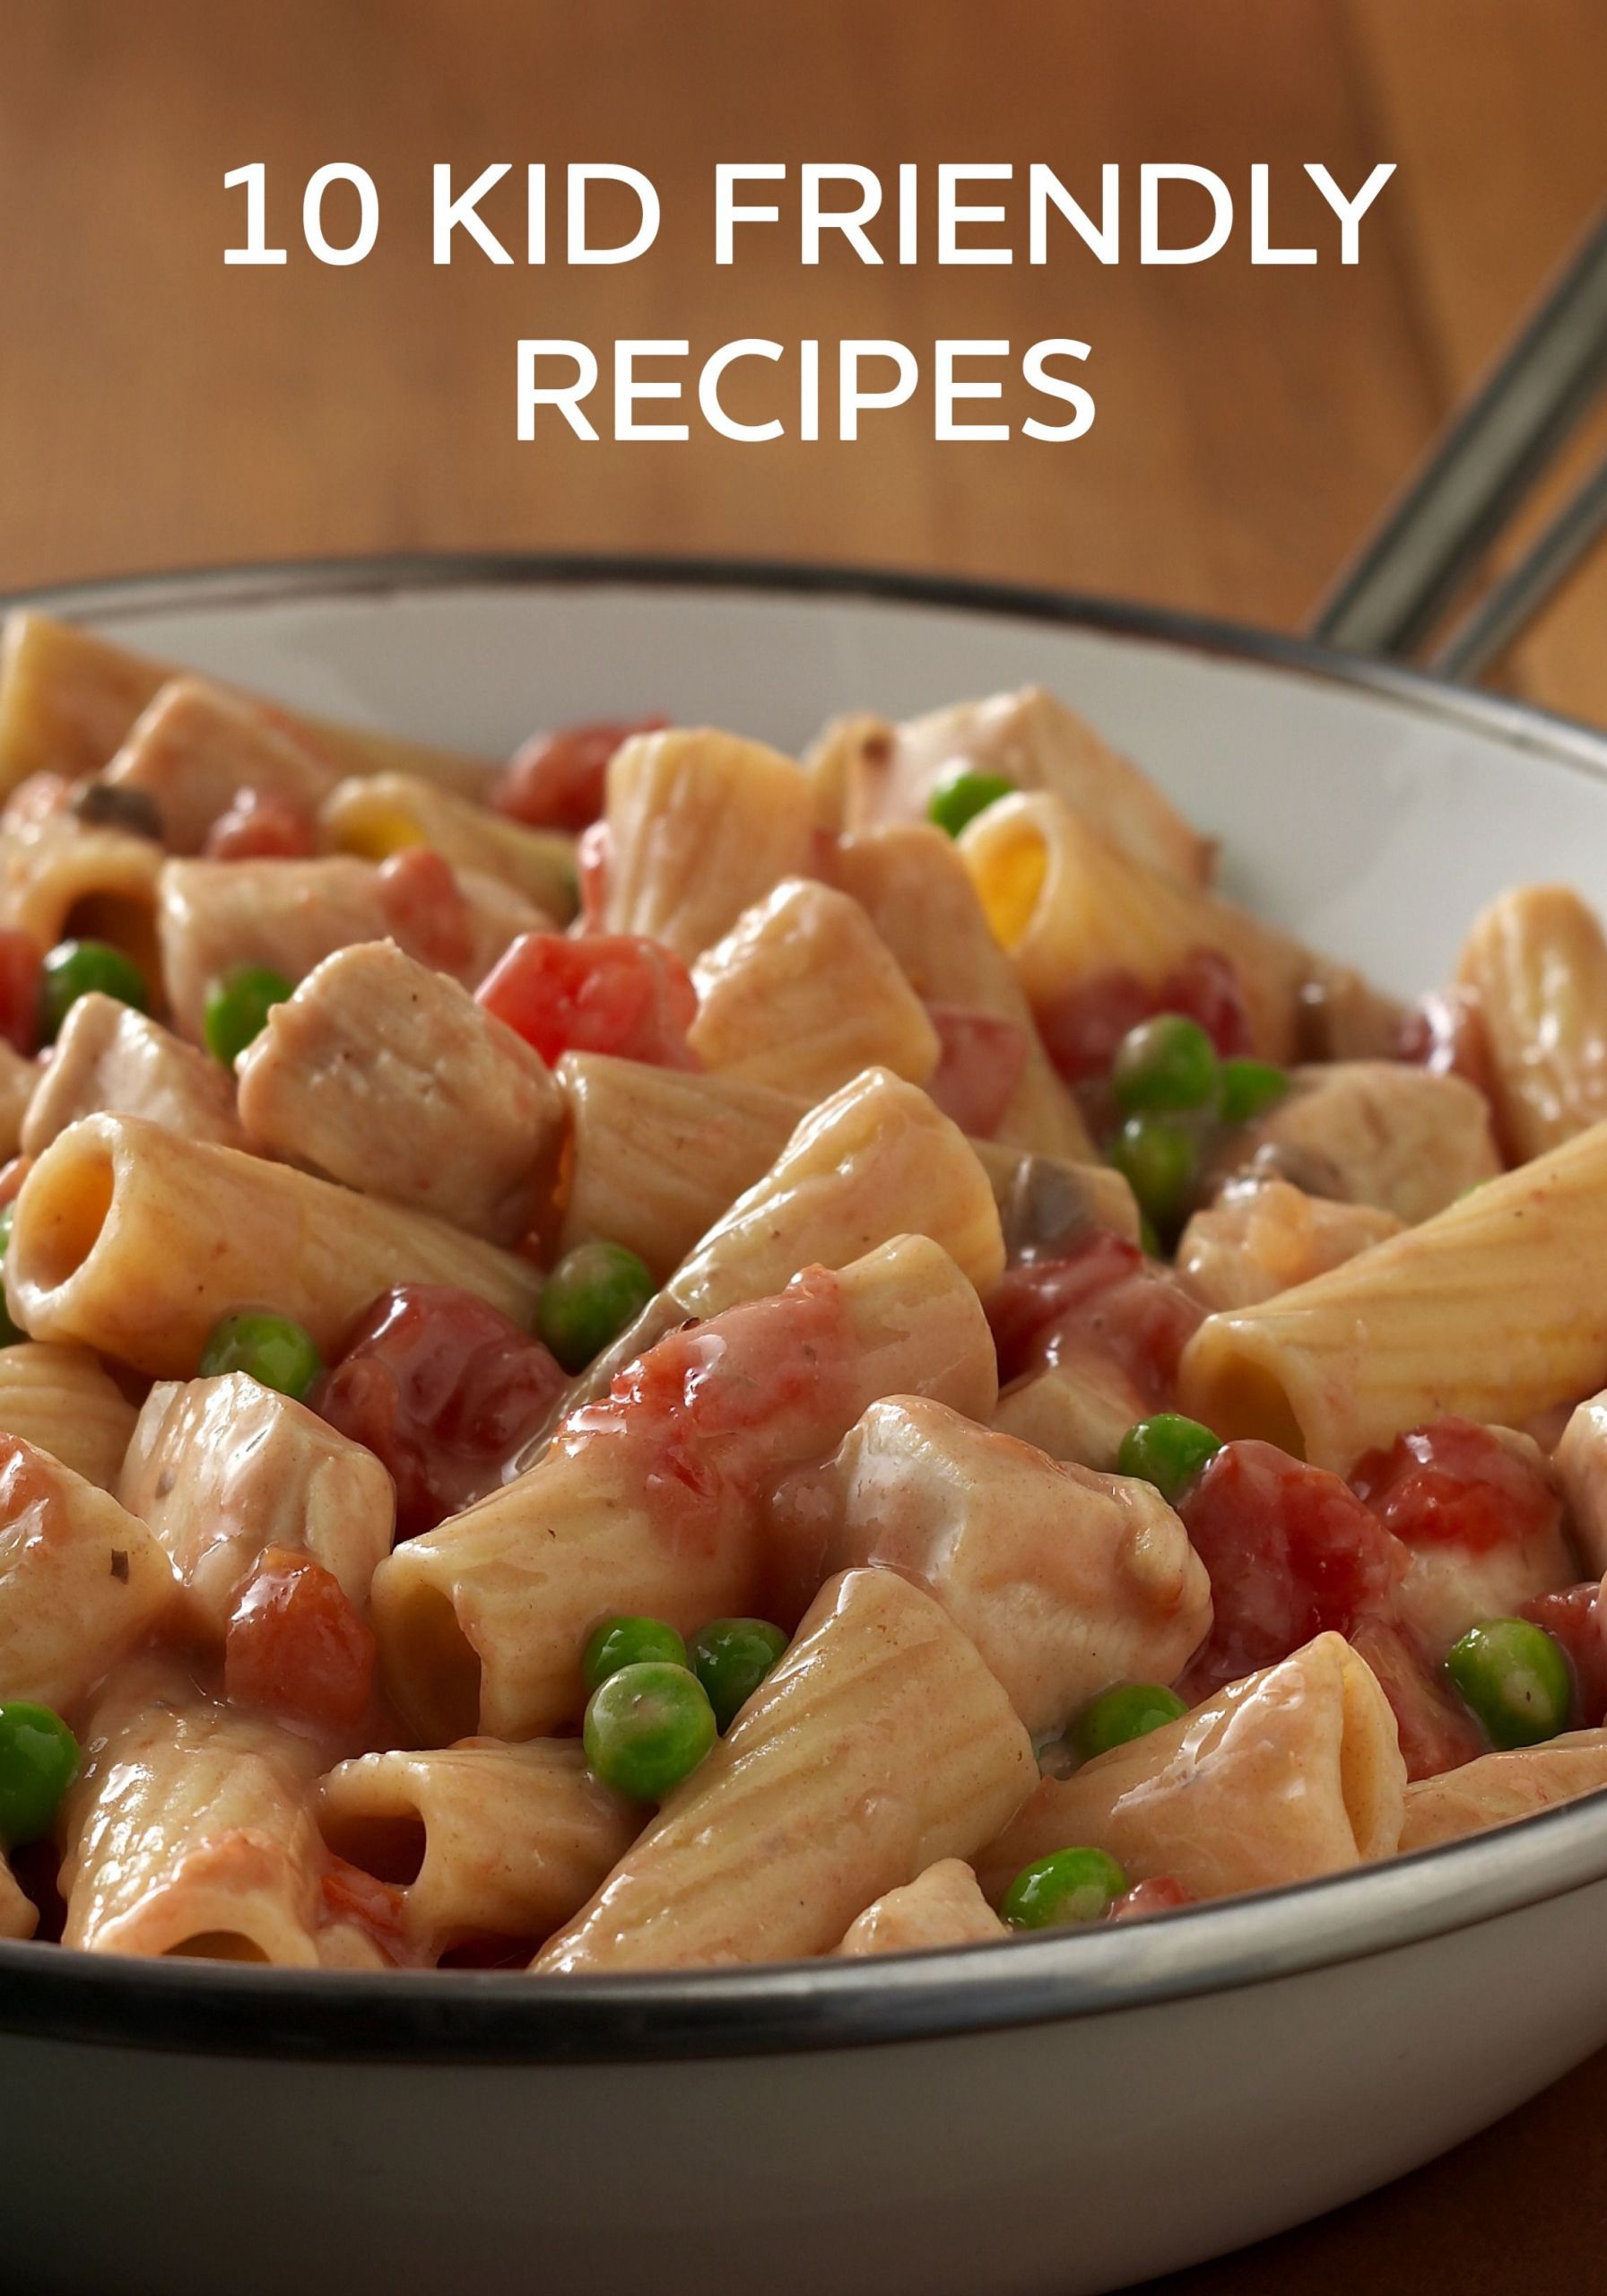 Dinner Ideas For The Family
 You’ll please the whole family with these easy dinner